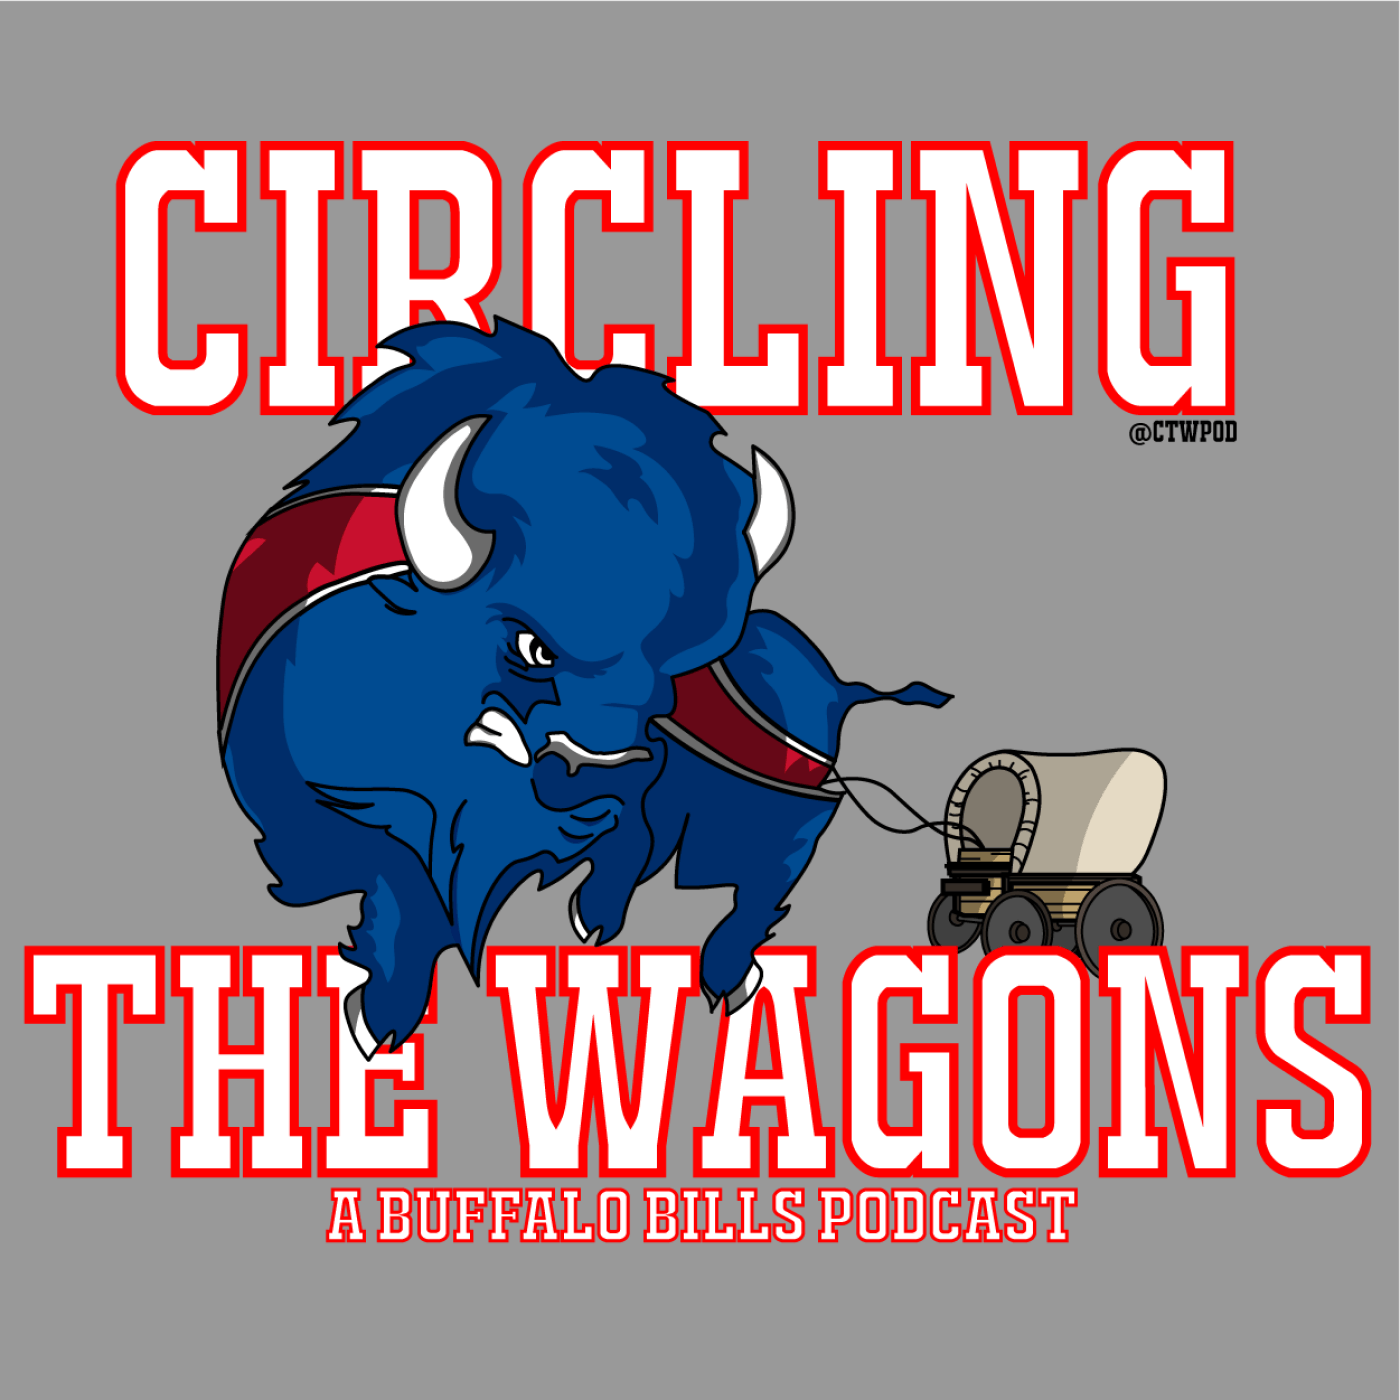 Circling the Wagons: Game of Thrones & Buffalo Bills Parallels Part 2